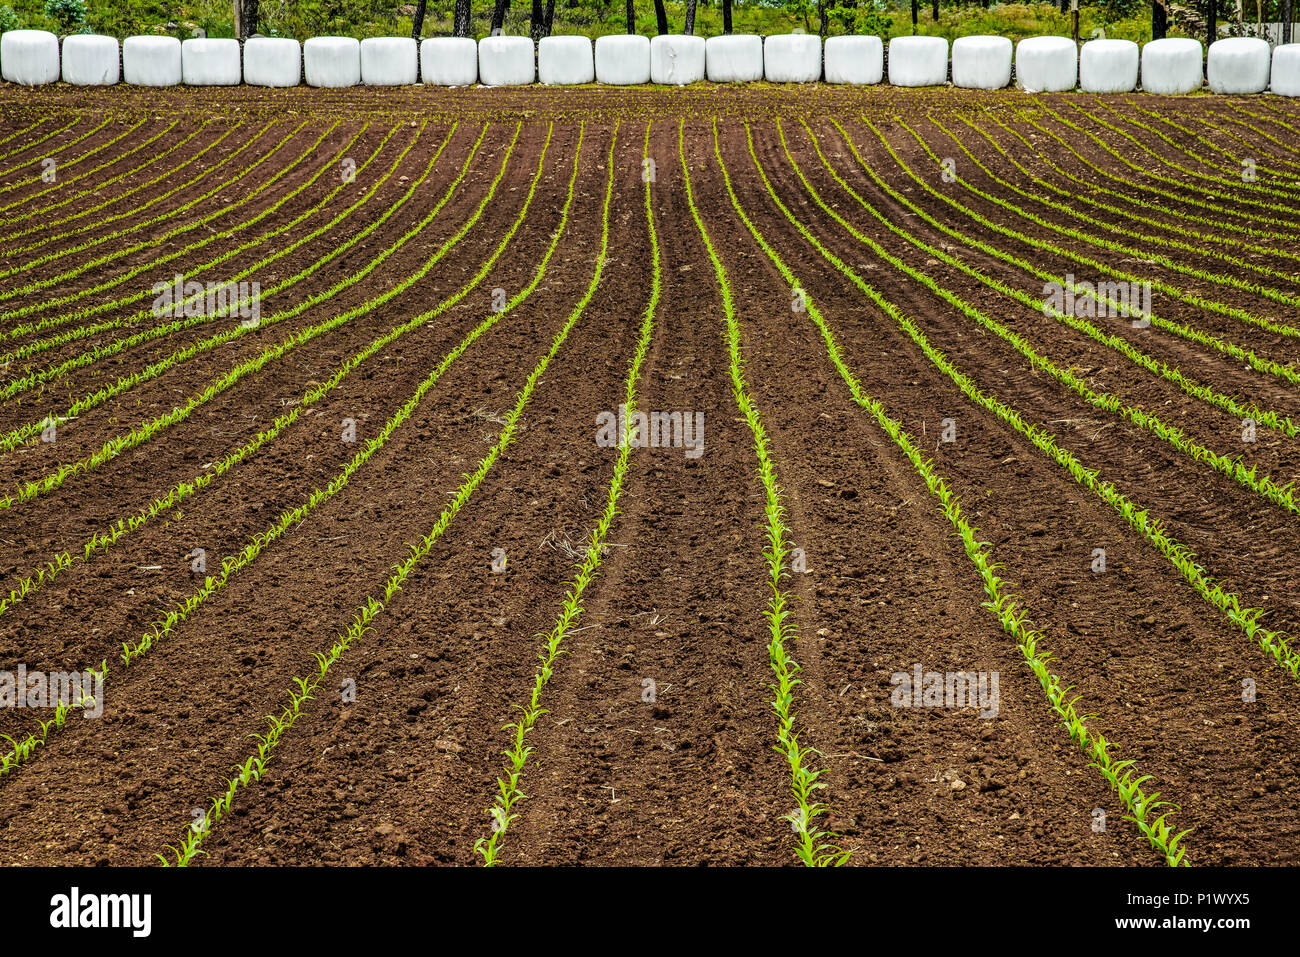 Crops growing In straight lines. Portugal. Stock Photo